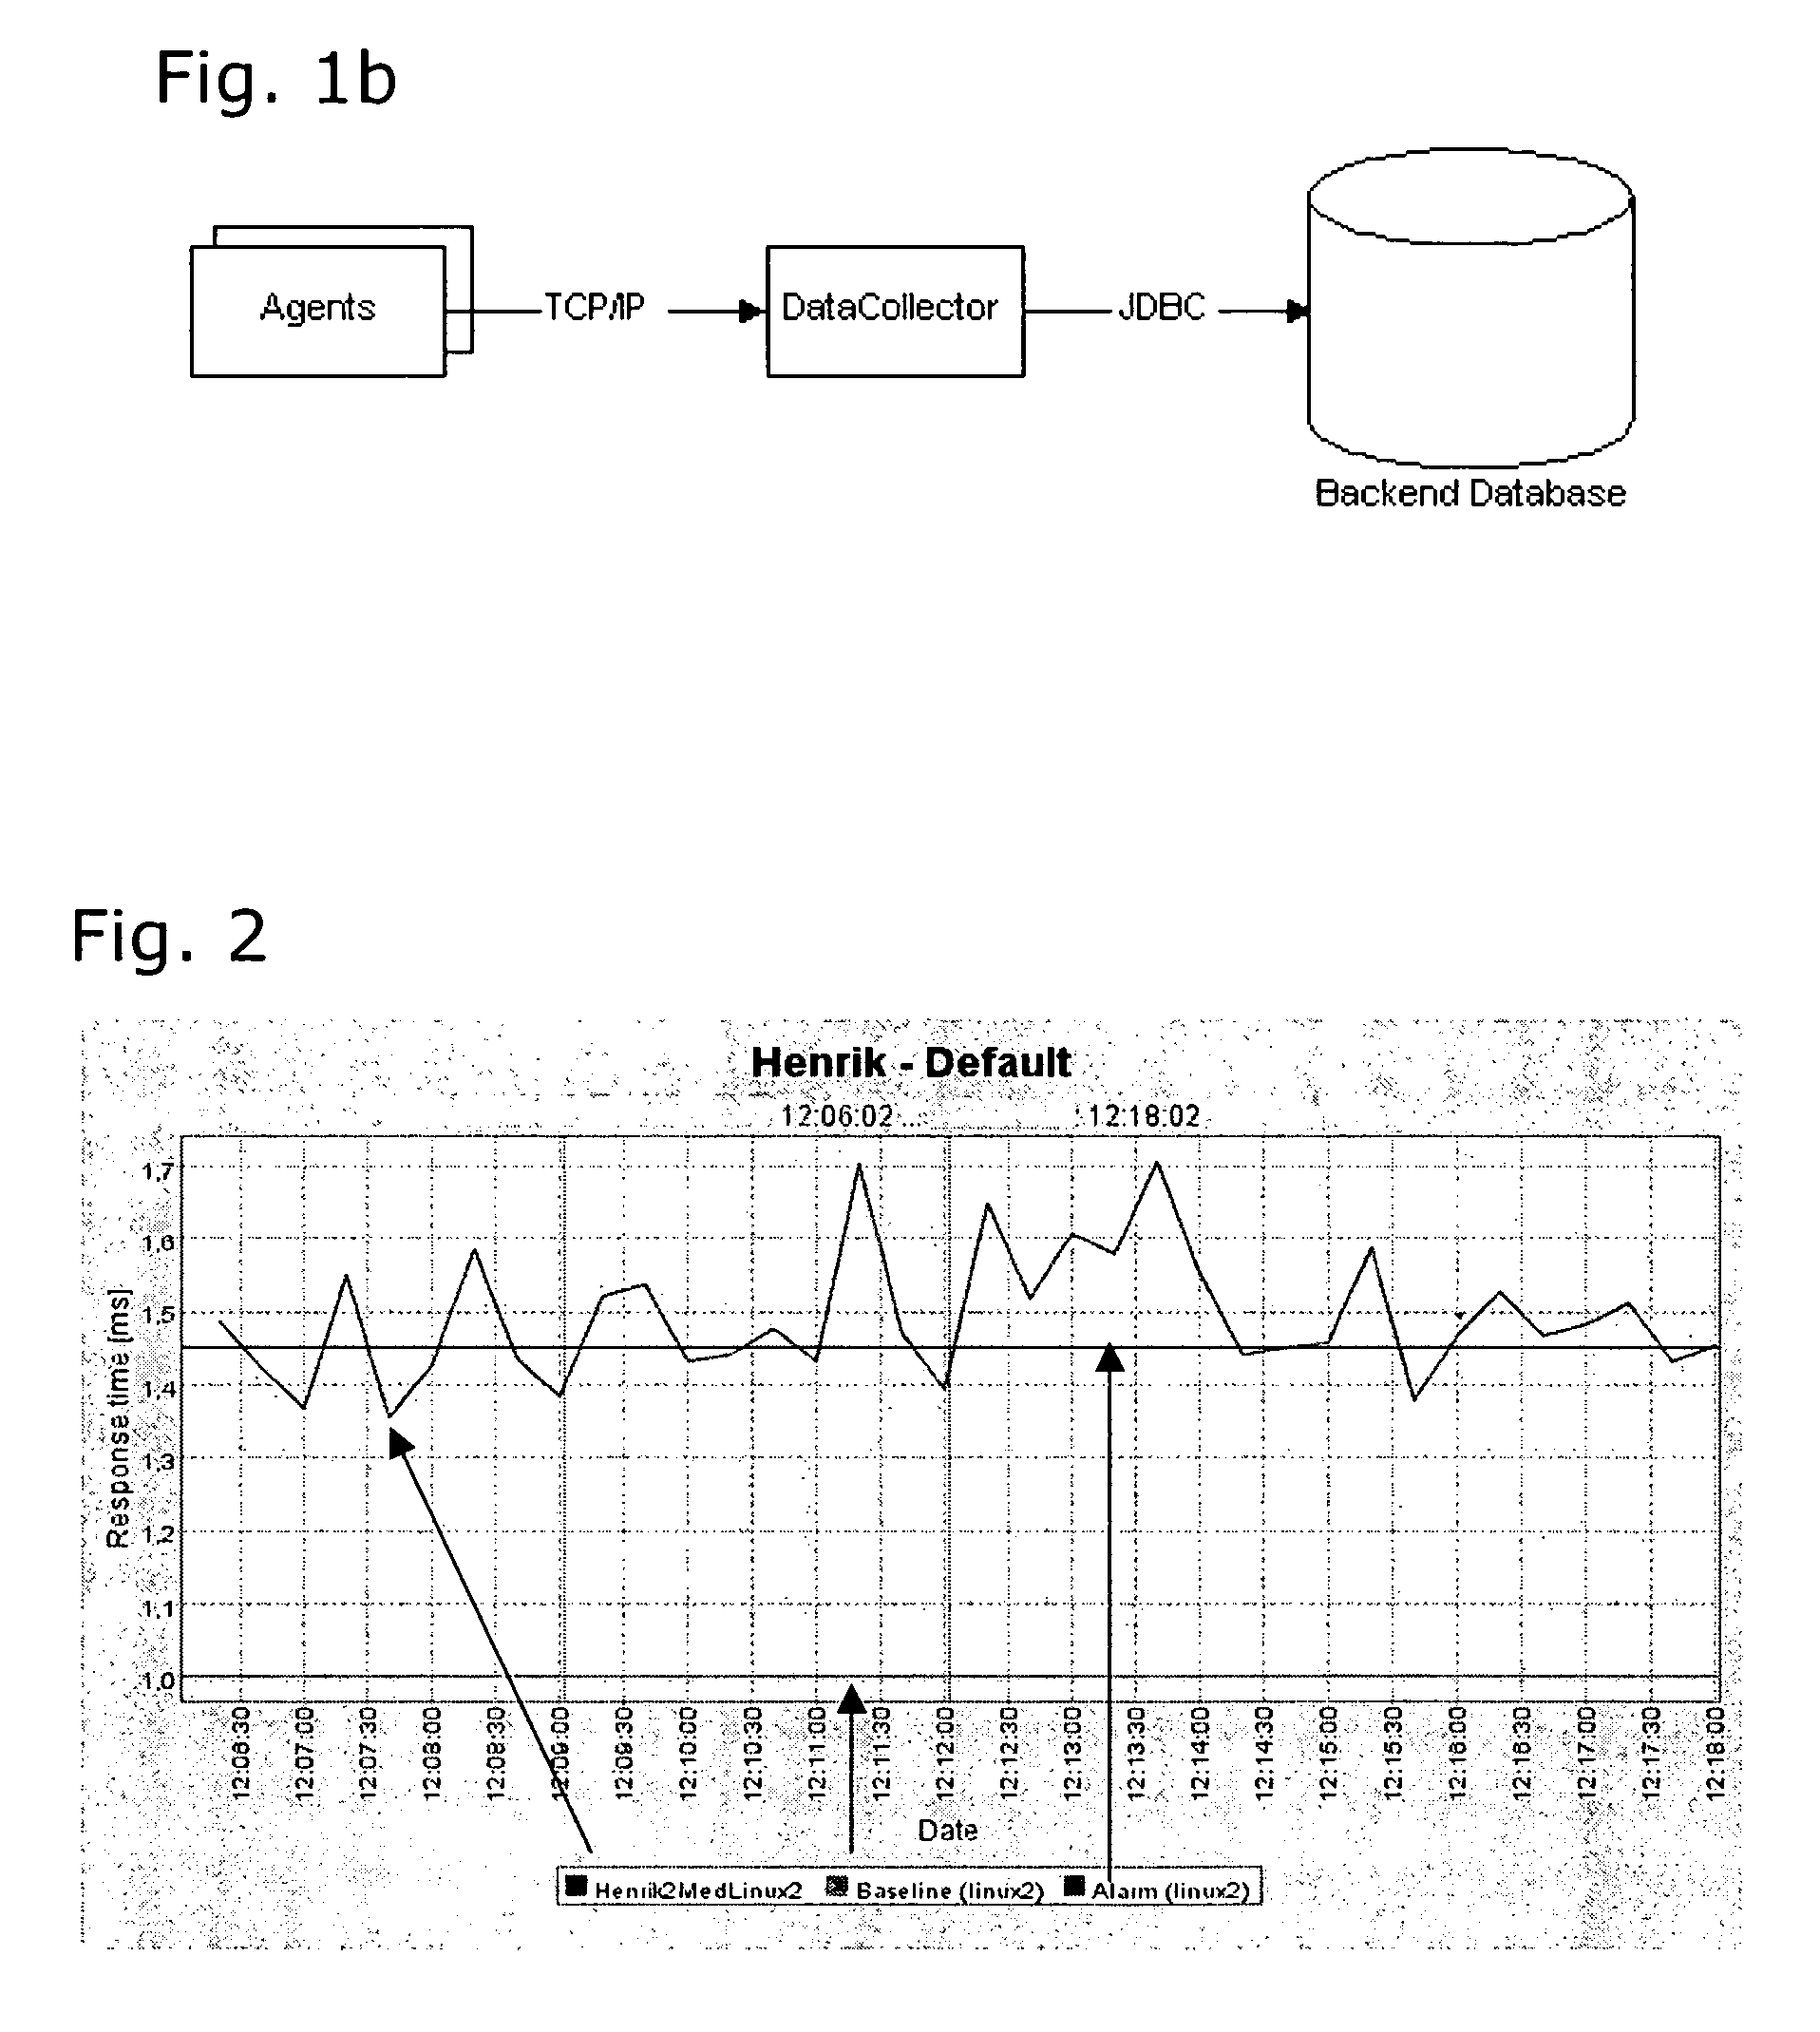 System and method for measuring and monitoring performance in a computer network